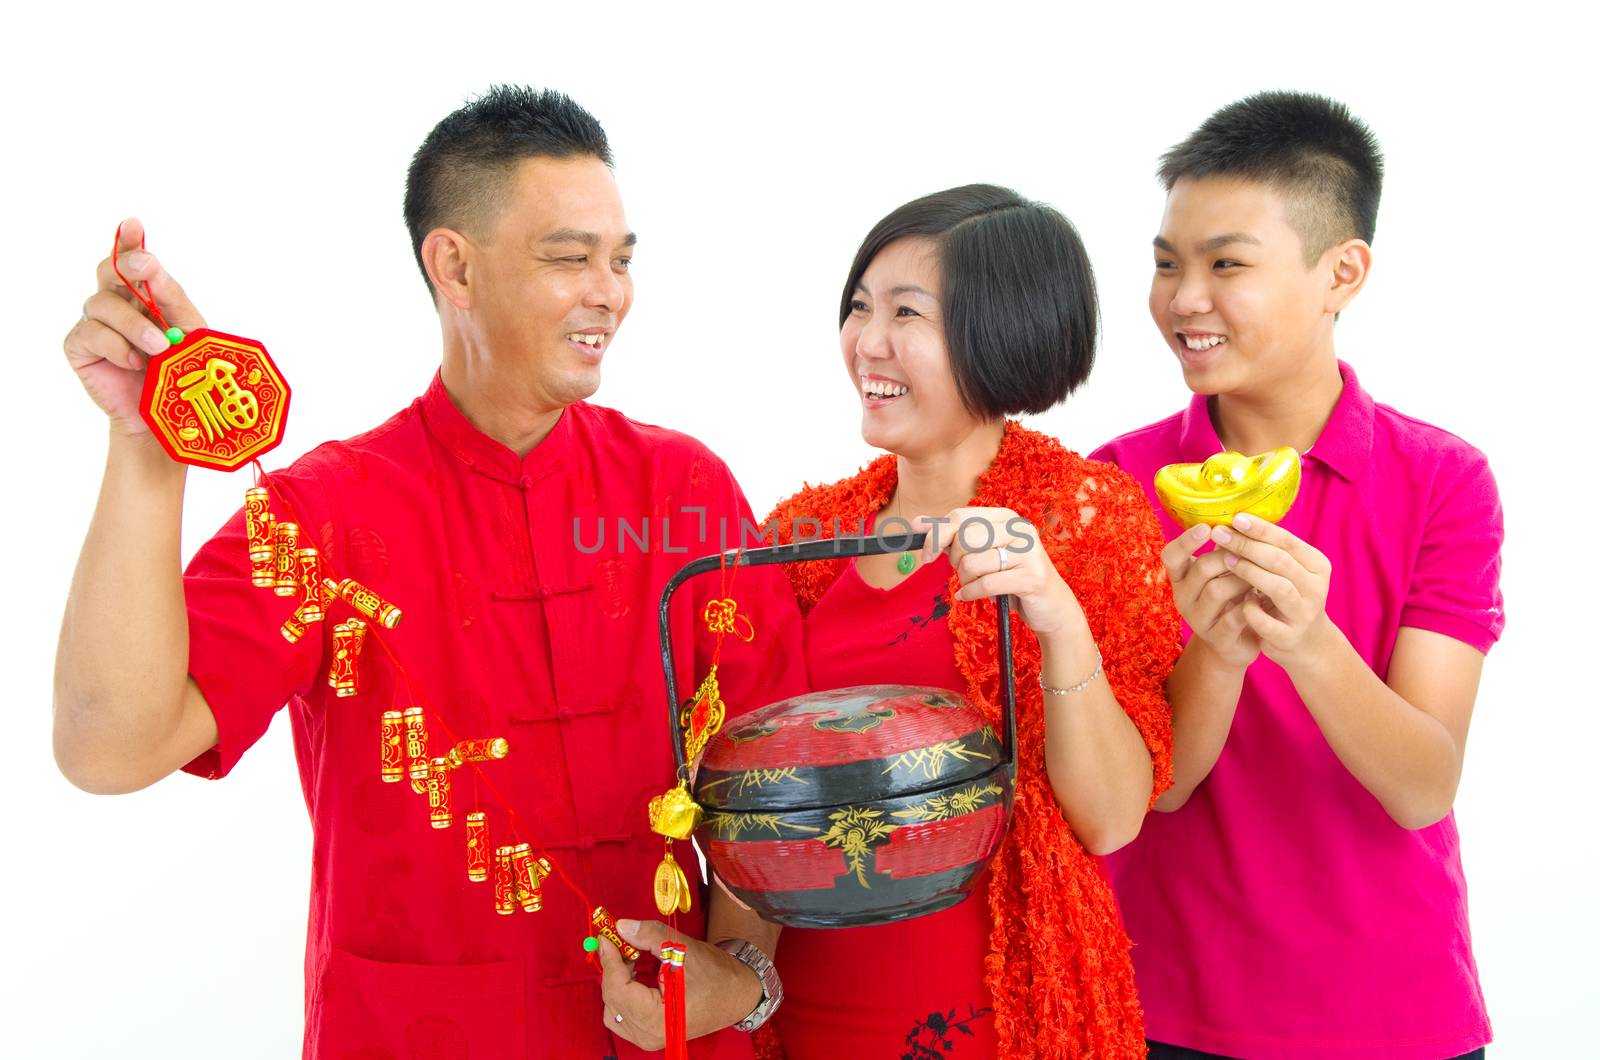 Asian family celebrate chinese new year